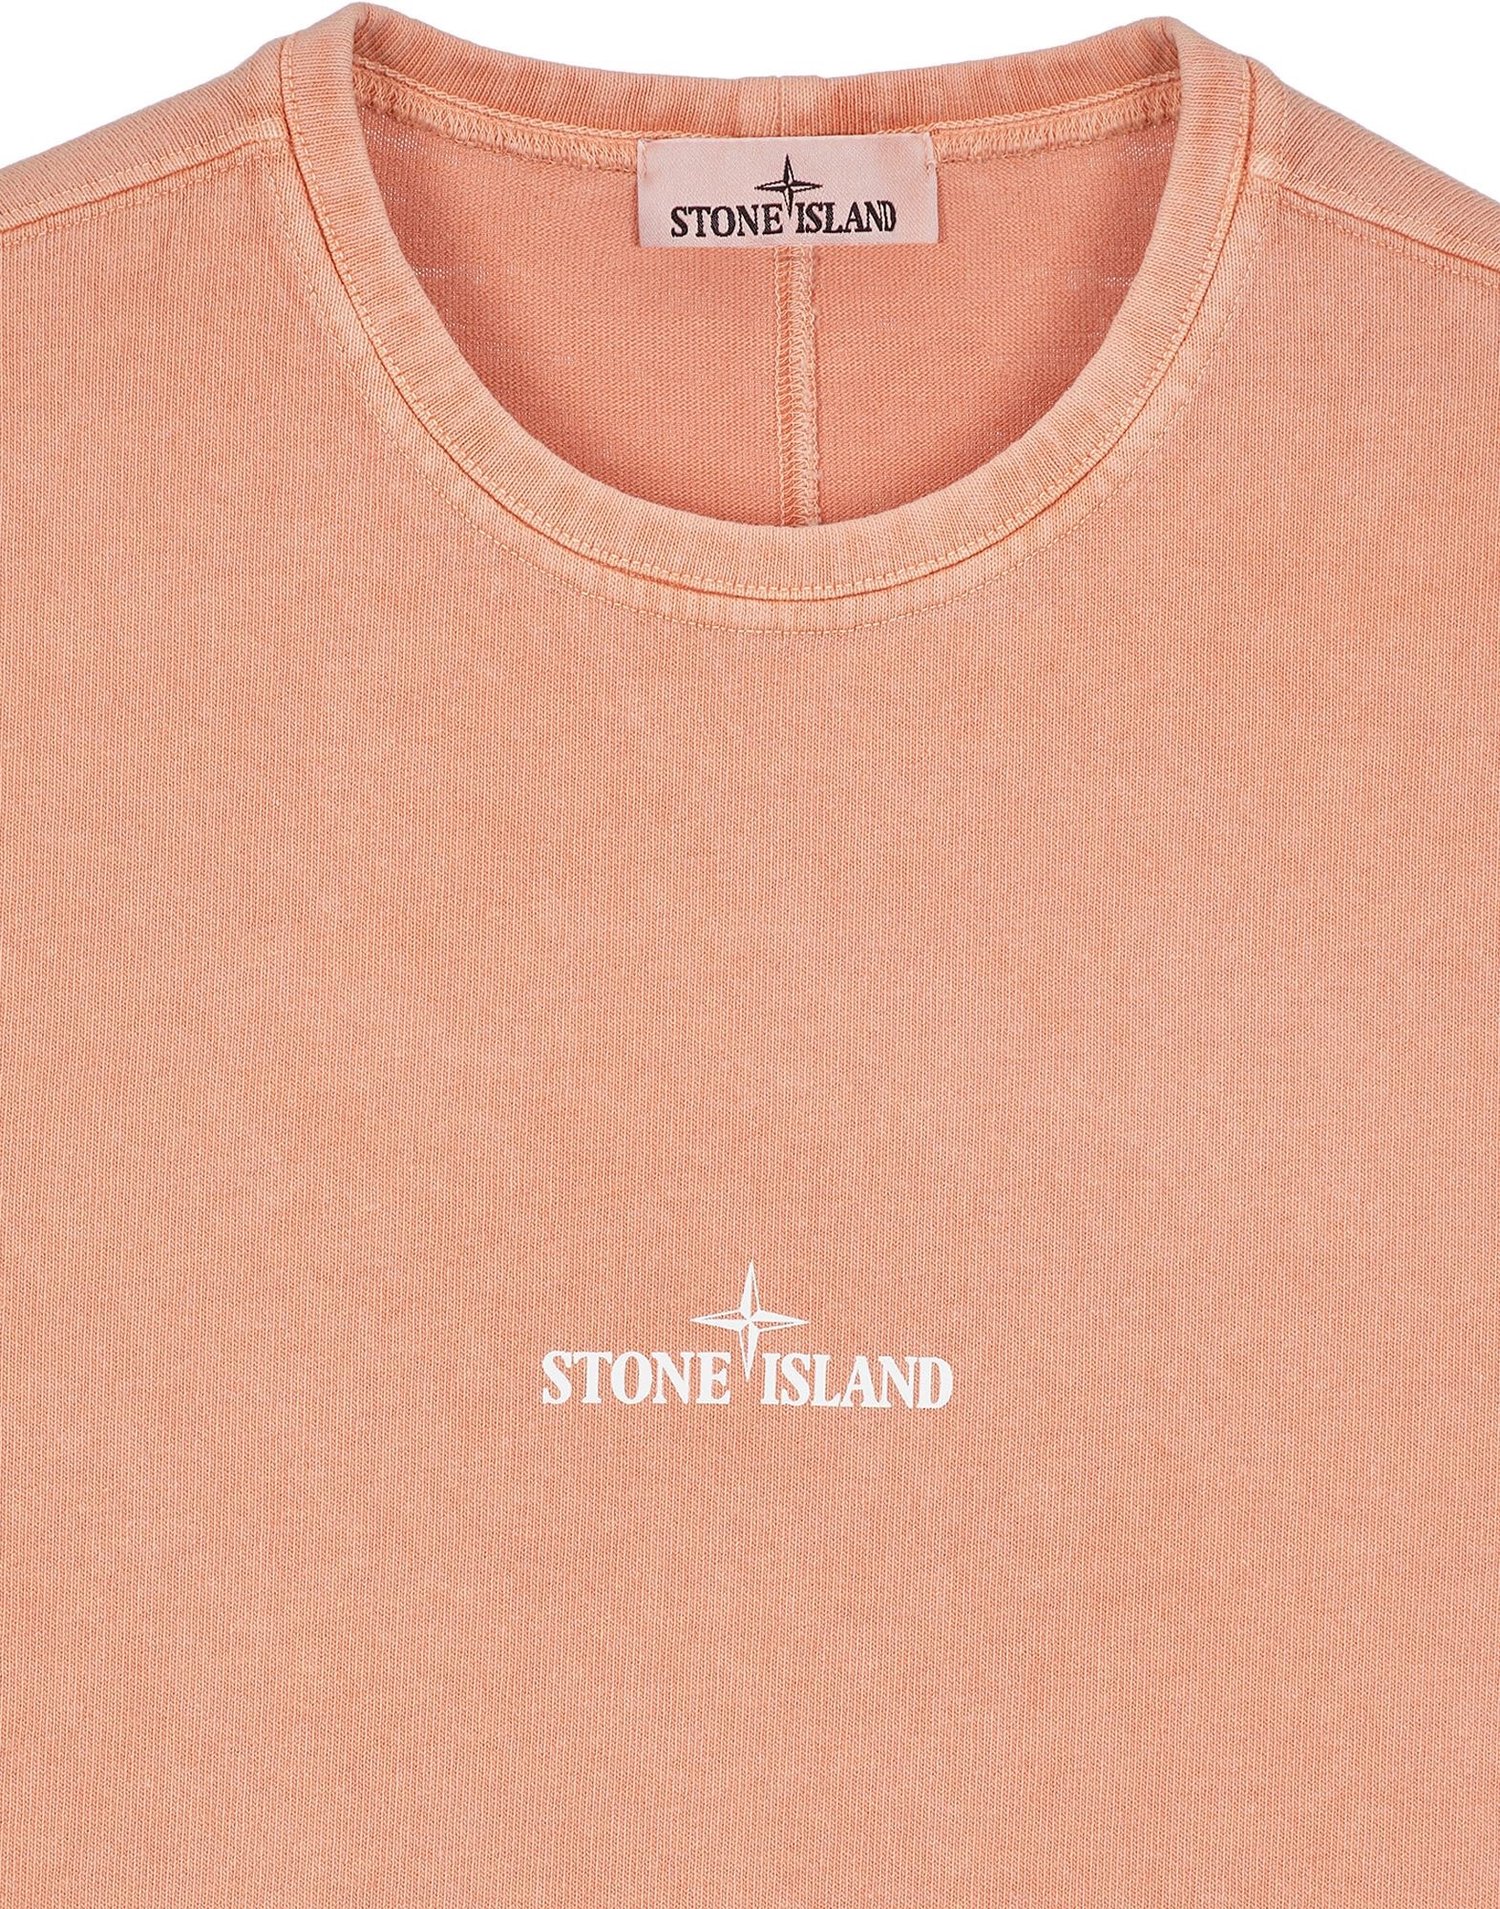 Image of STONE ISLAND 209T2 60% RECYCLED HEAVY COTTON JERSEY, TINTO TERRA